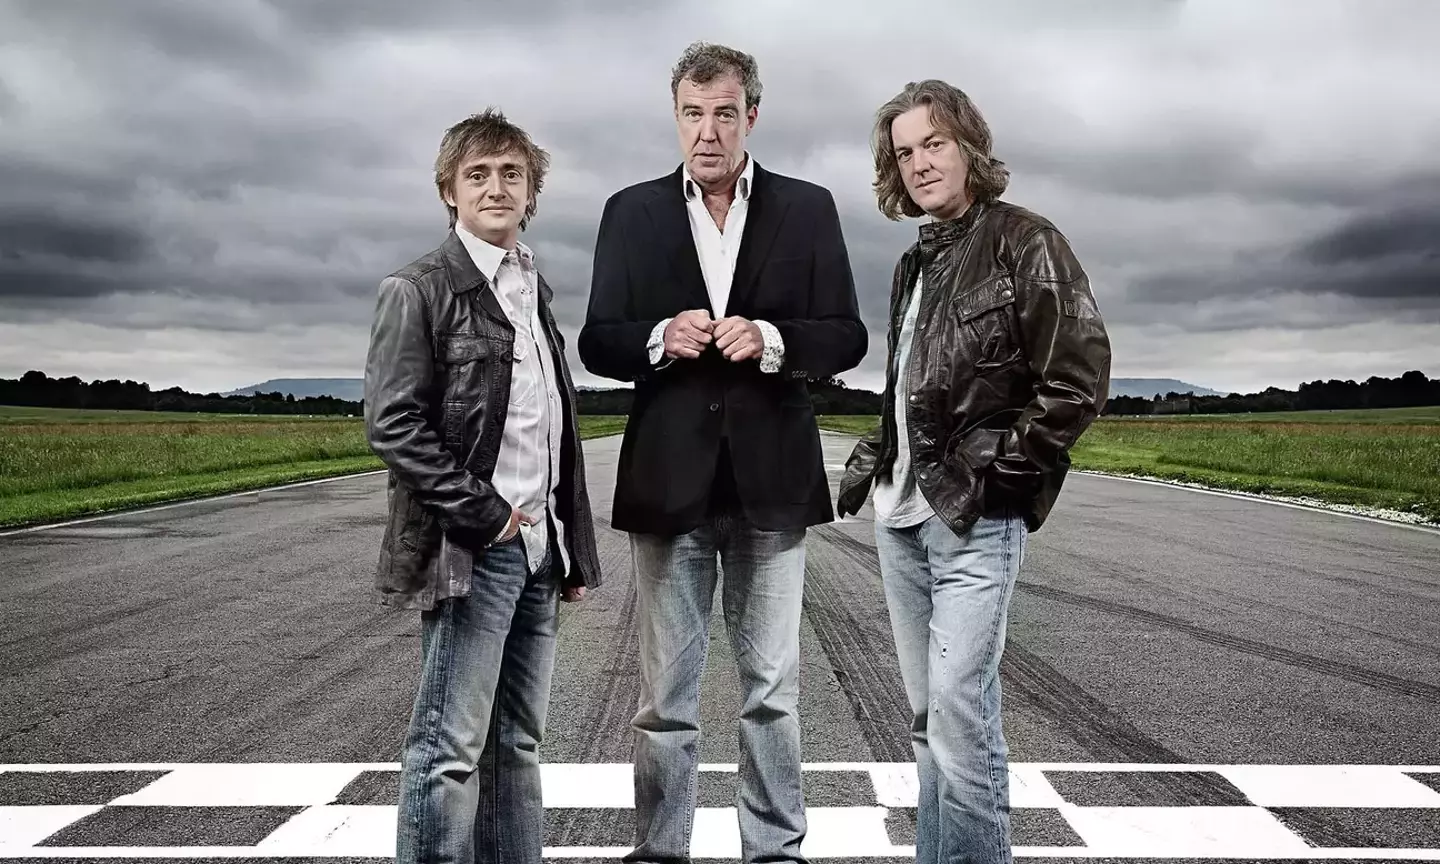 The trio previously worked together on Top Gear.